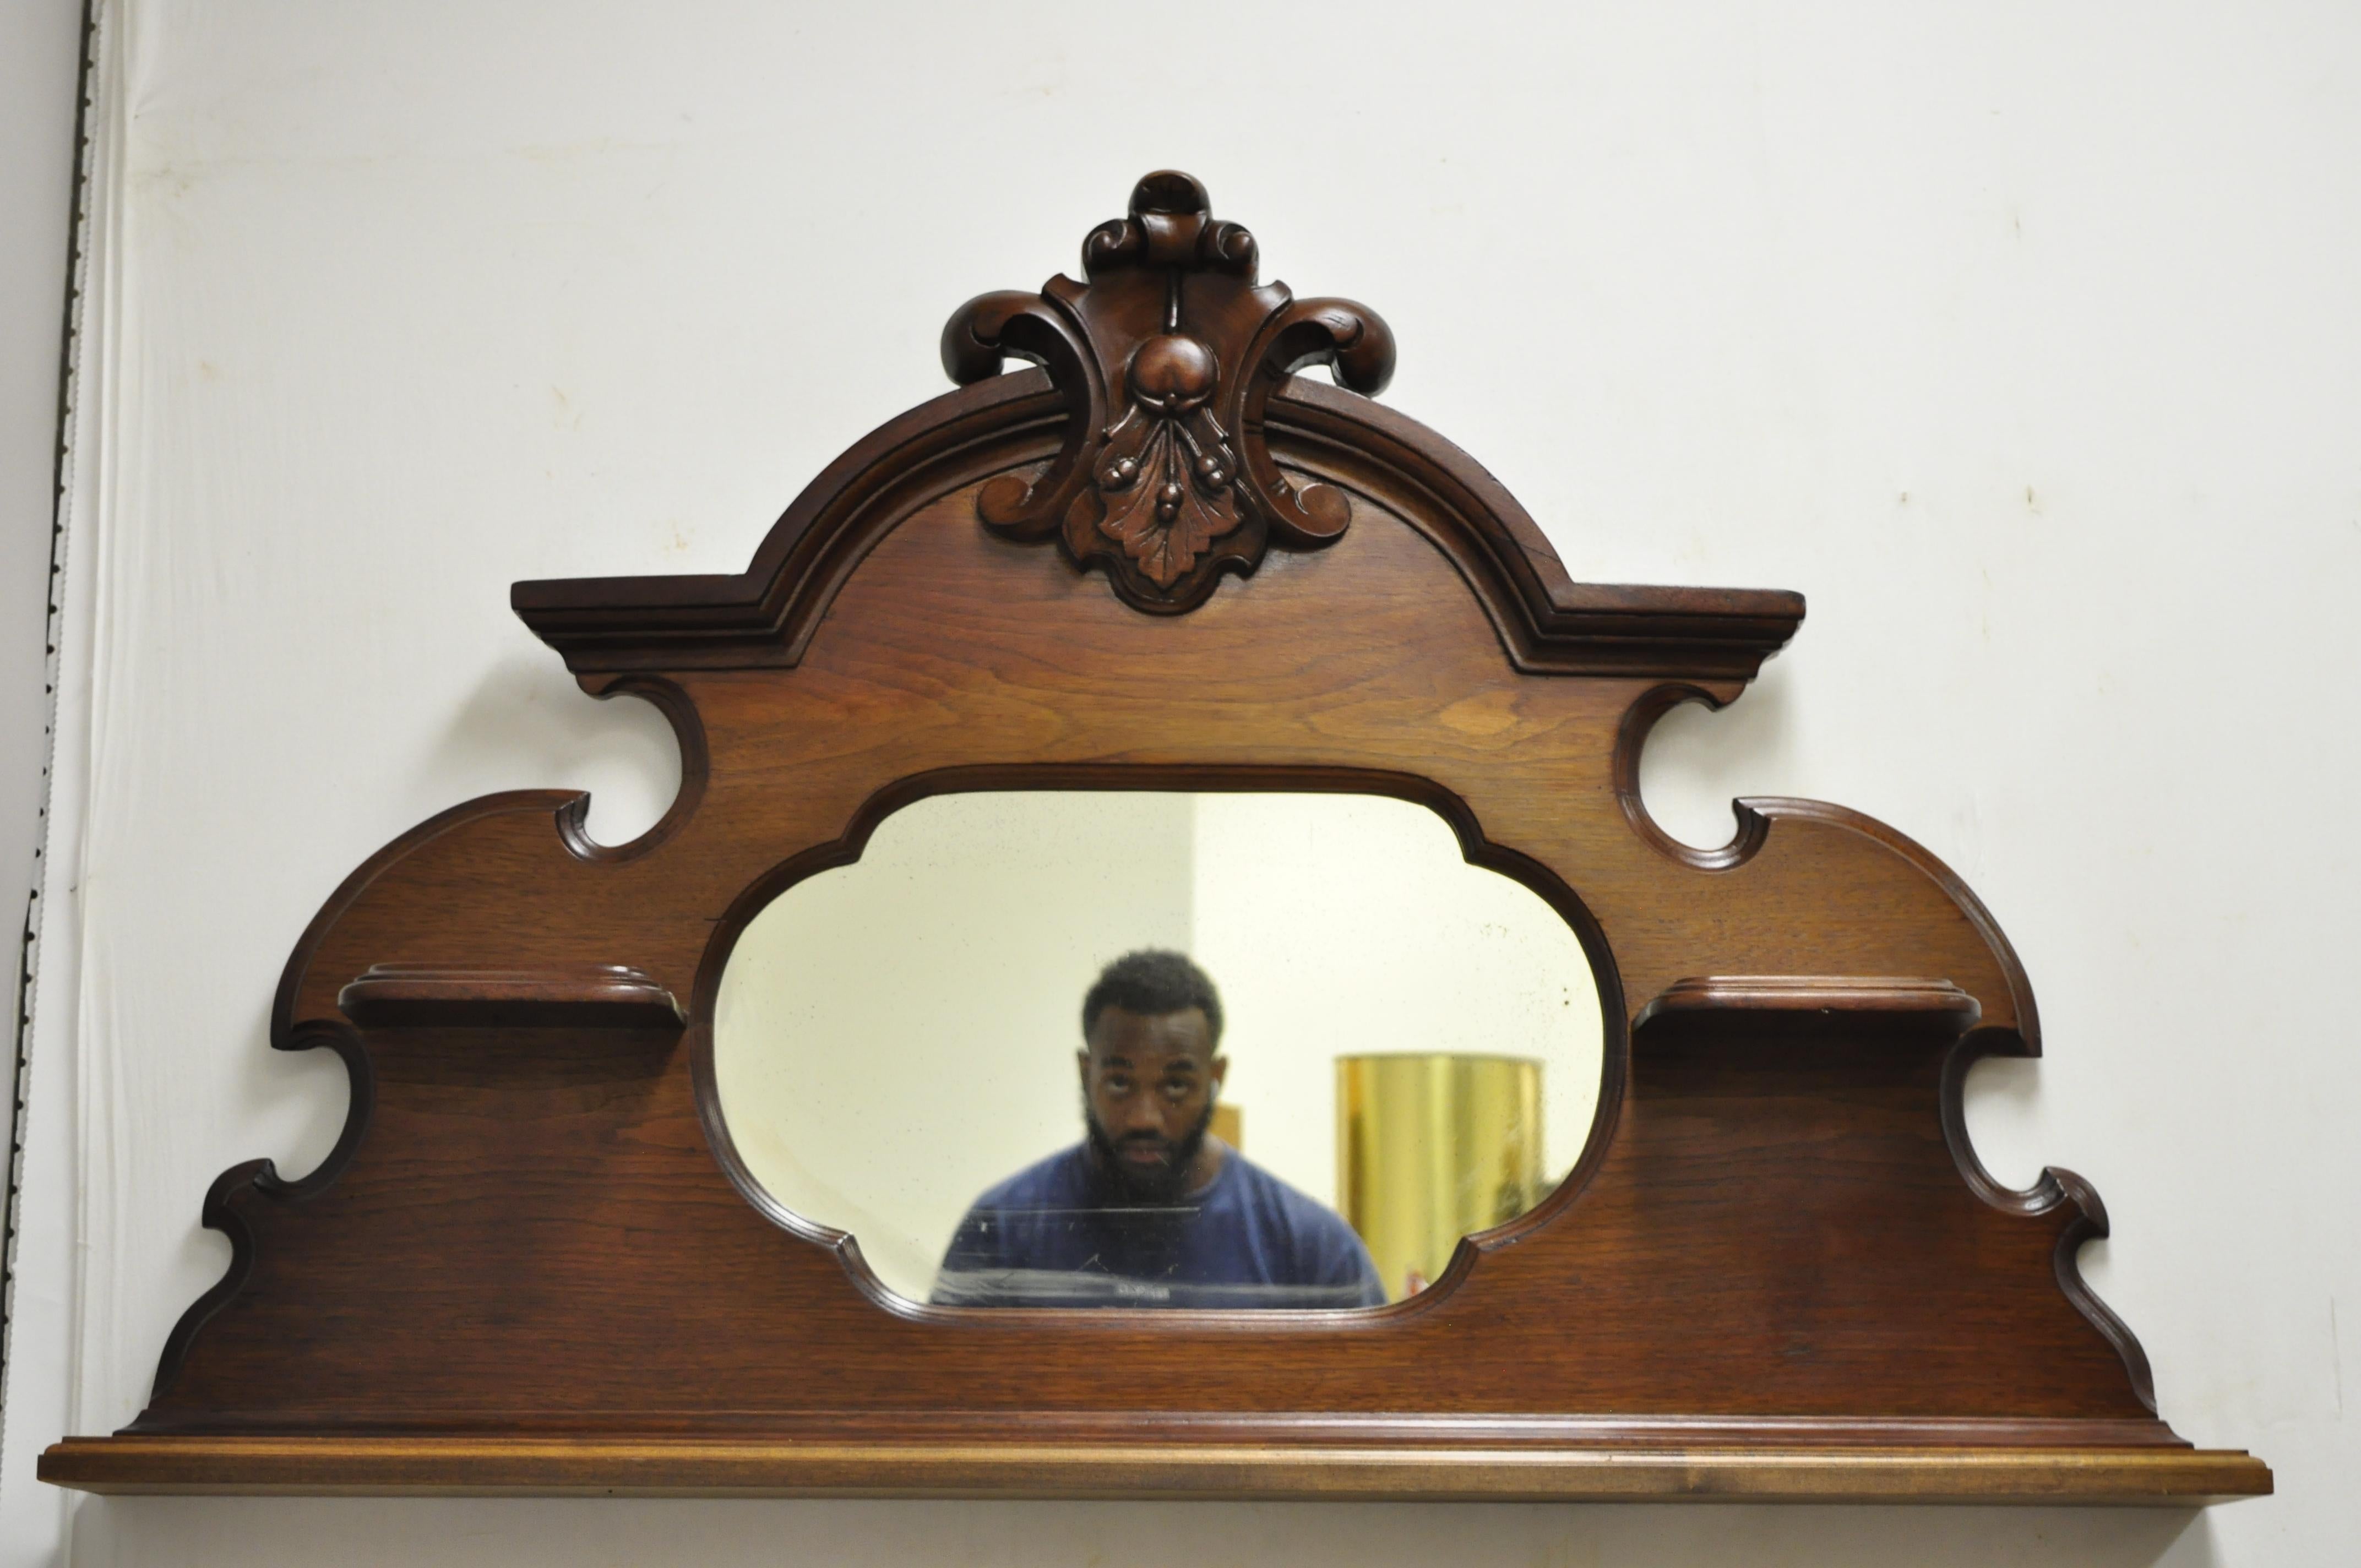 Antique Eastlake Victorian carved walnut wall hanging mirror wall shelf display. Item features unique wall hanging mirror with shelves, solid wood frame, beautiful wood grain, nicely carved details, 3 wooden shelves, very nice antique item, circa